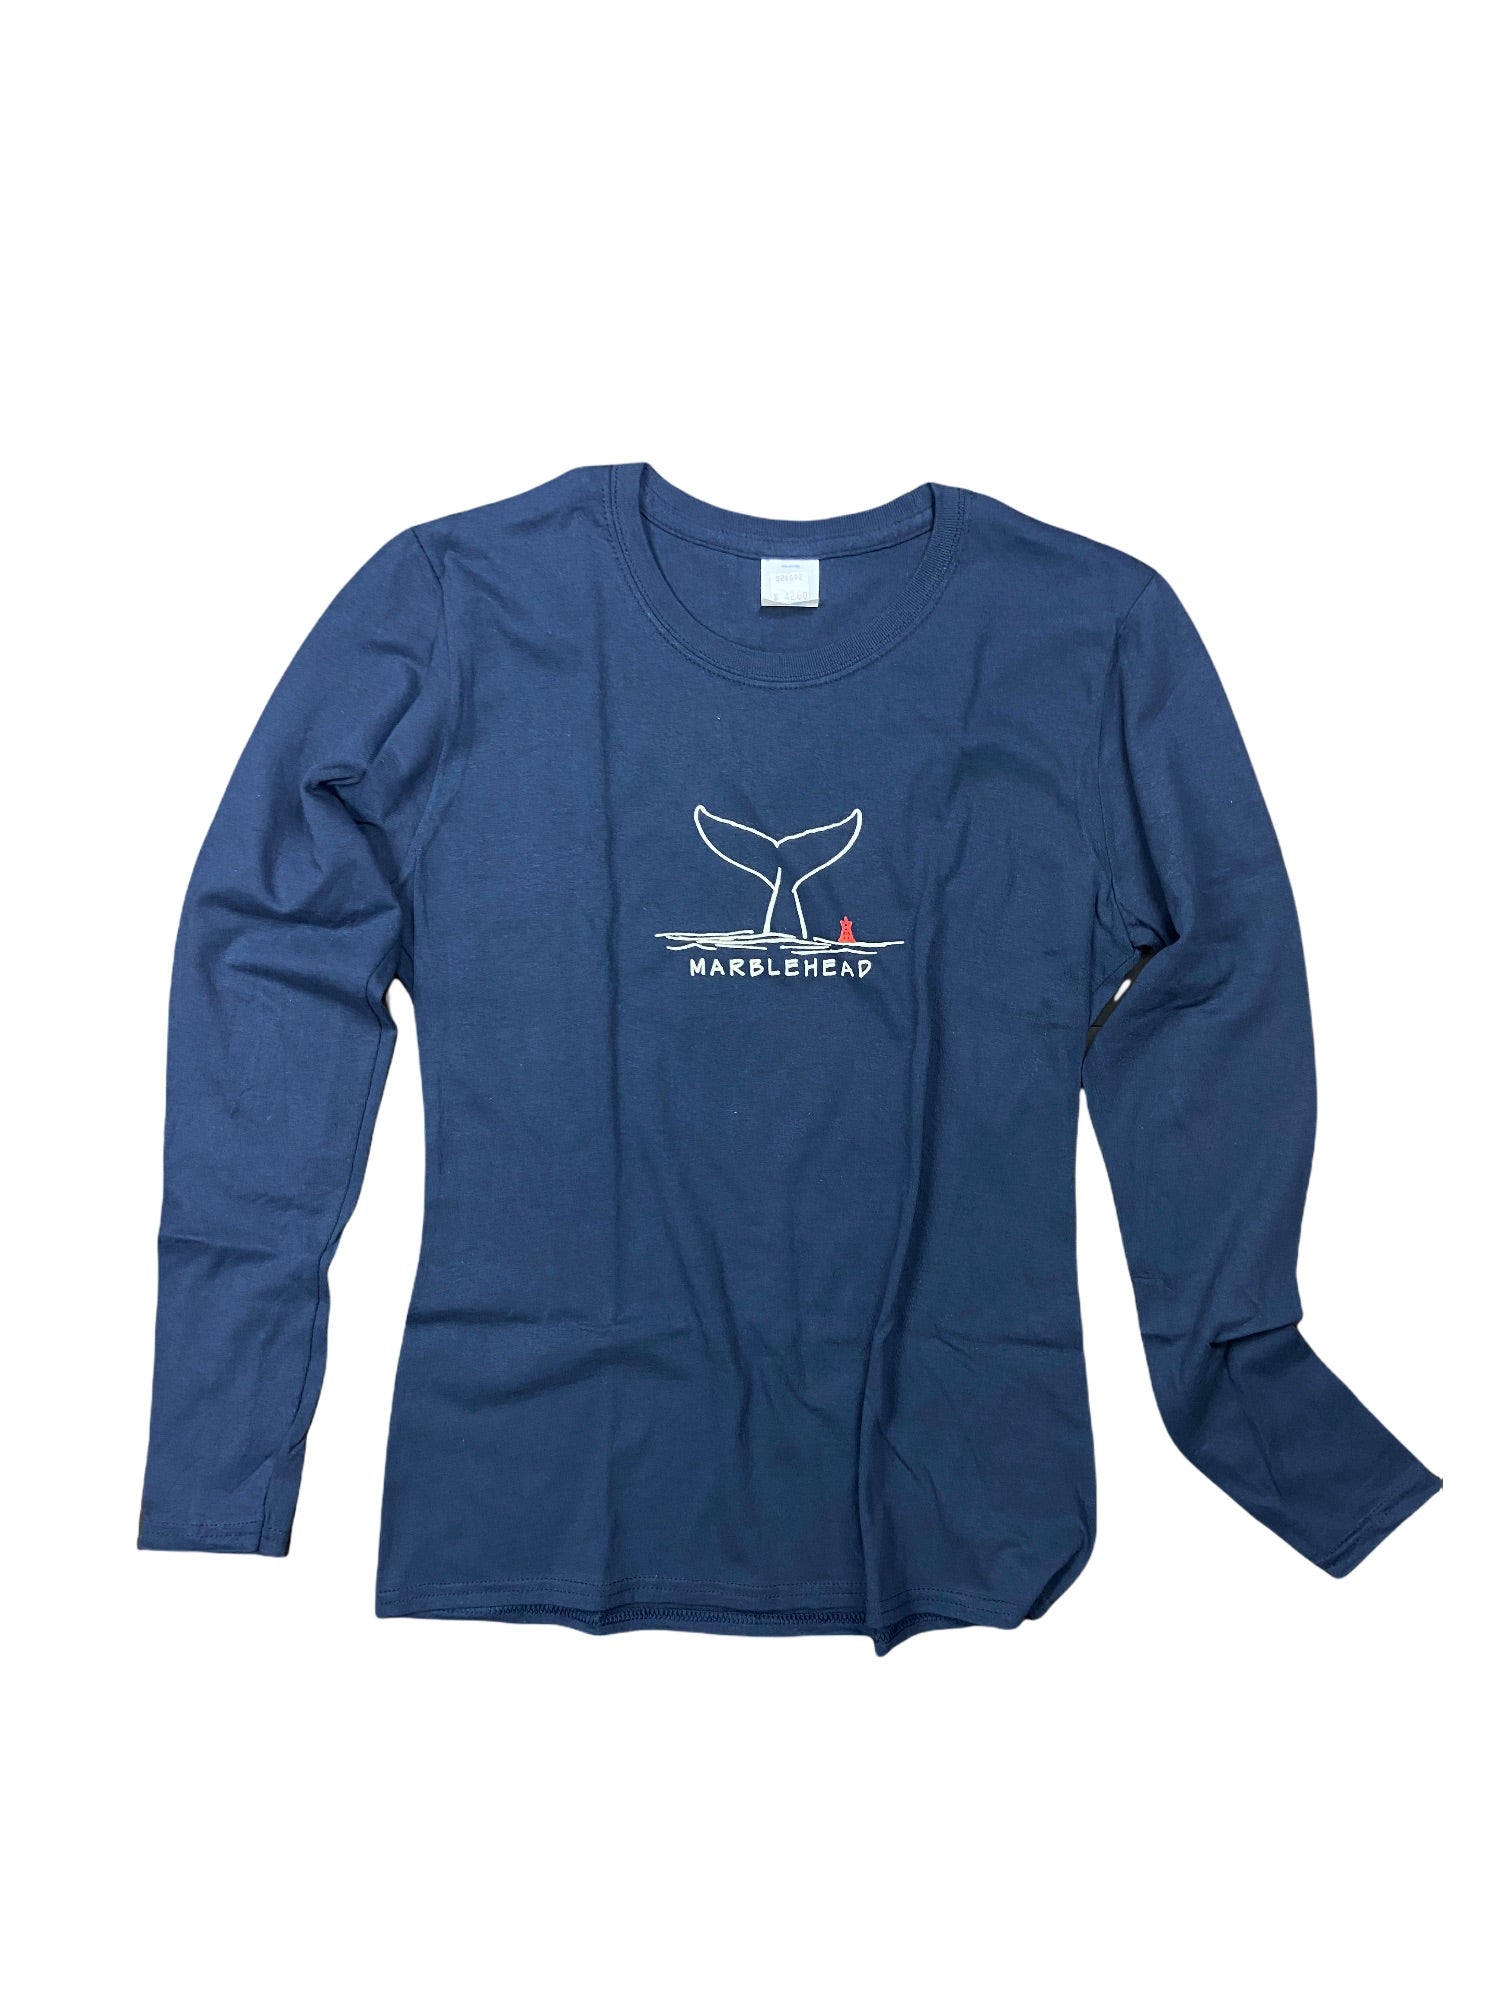 L/S Whale Tail Tee Navy